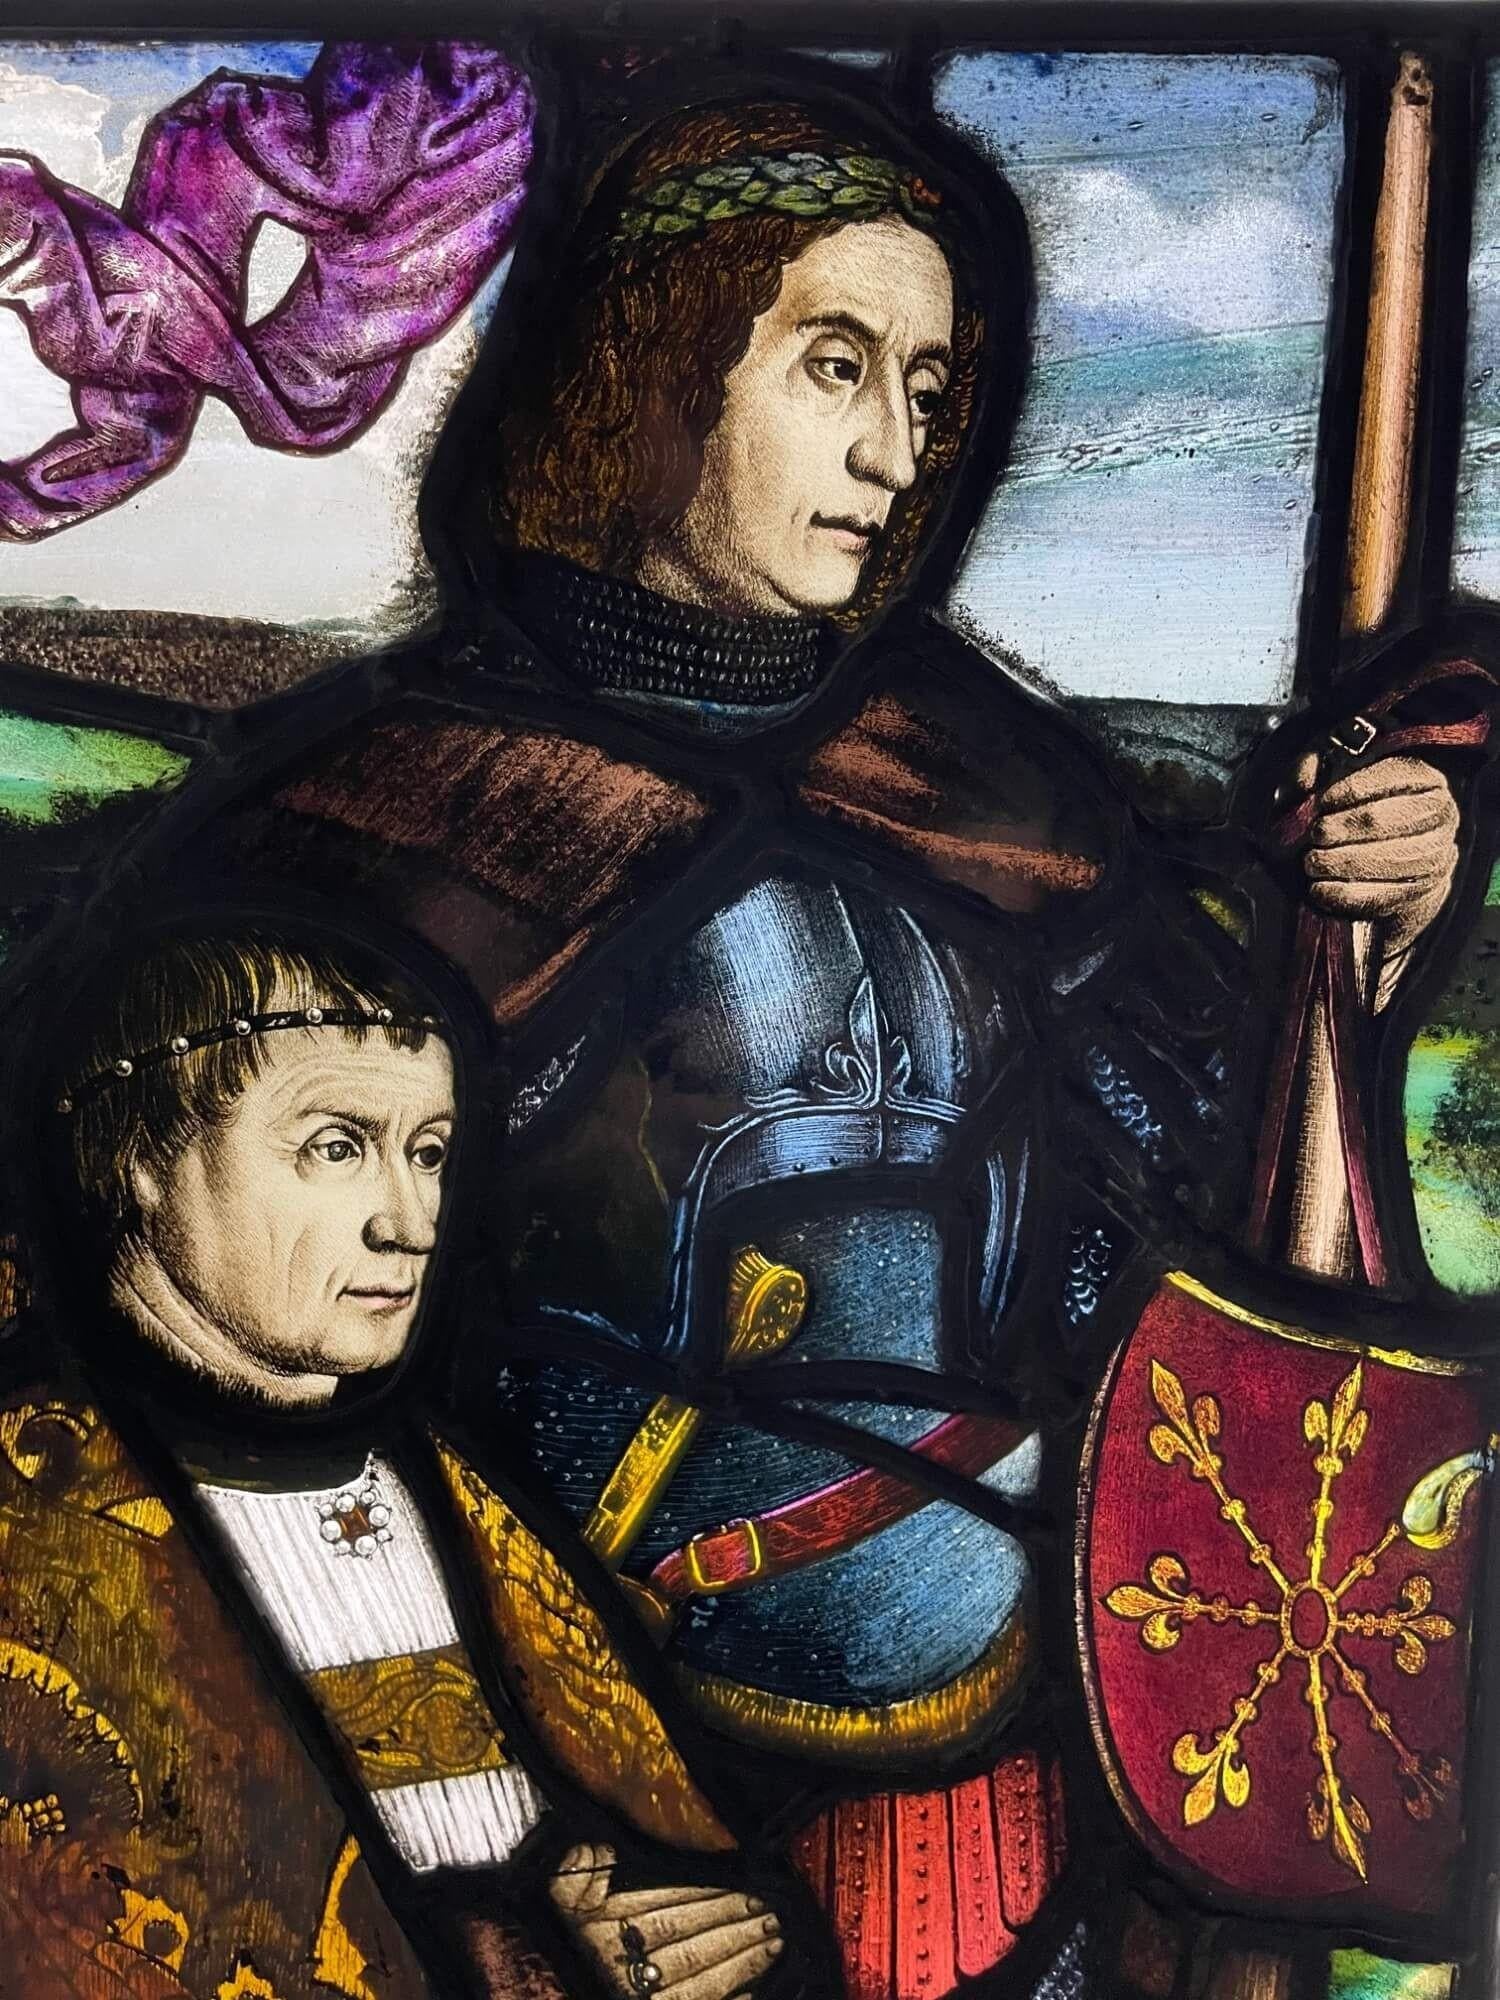 An antique English medieval style leaded glass window circa 1850 in Tudor revival style depicting an armoured knight holding a banner beside a priest as if standing at the edge of a great battle. Vibrant colours and sharp details make this stained